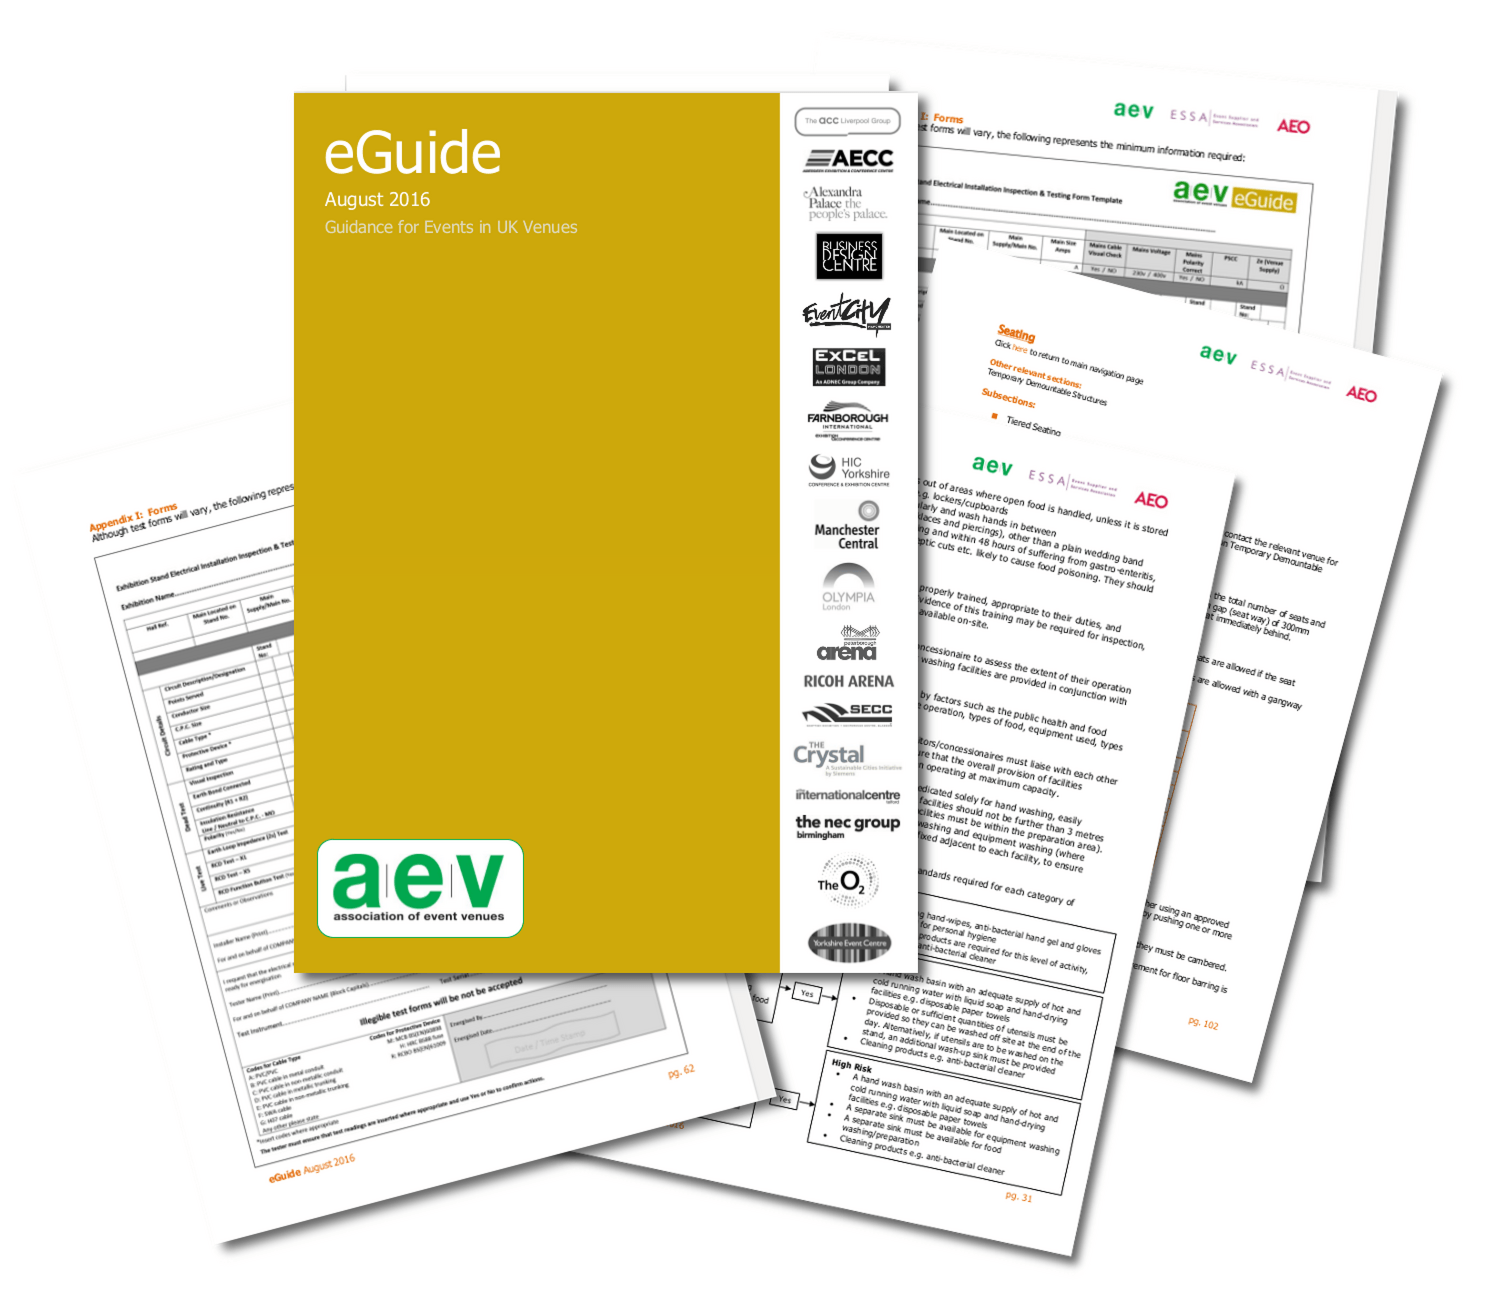 Summer 2016 eGuide now available from AEV.